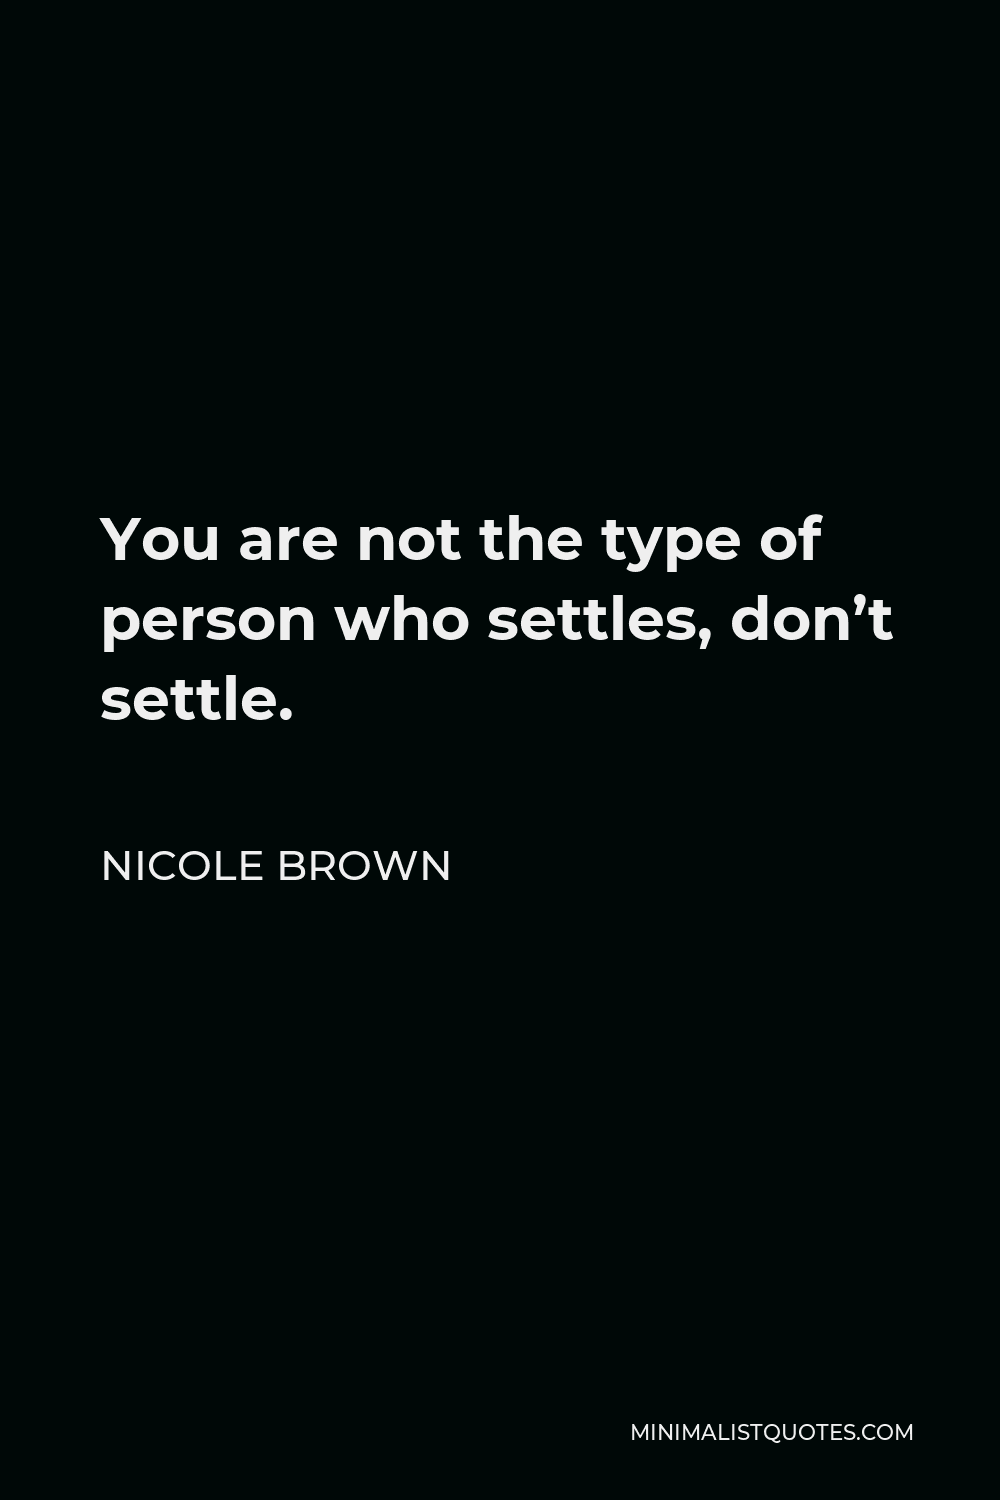 Nicole Brown Quote - You are not the type of person who settles, don’t settle.